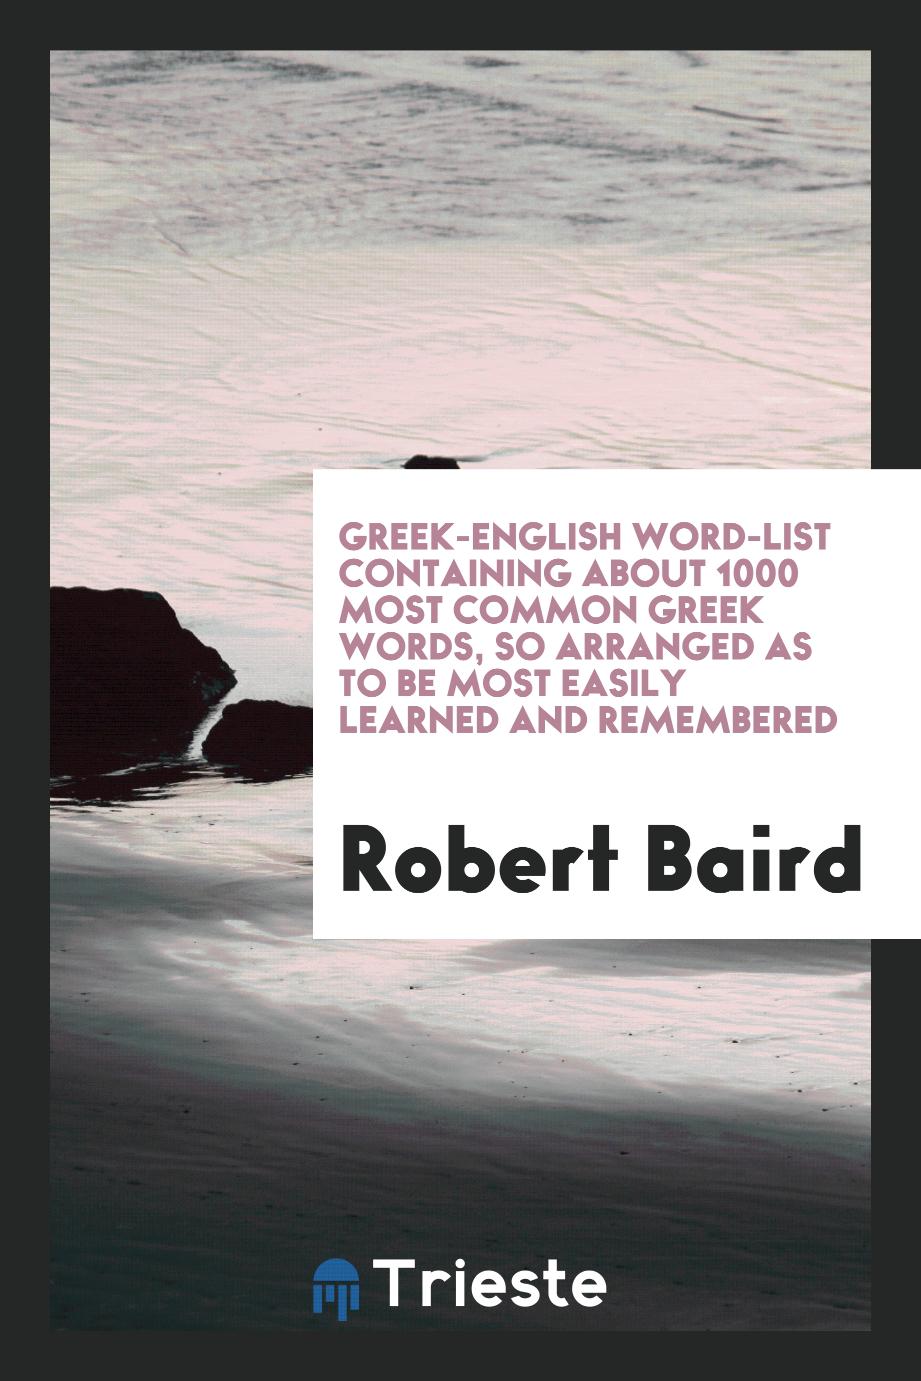 Greek-English word-list containing about 1000 most common Greek words, so arranged as to be most easily learned and remembered